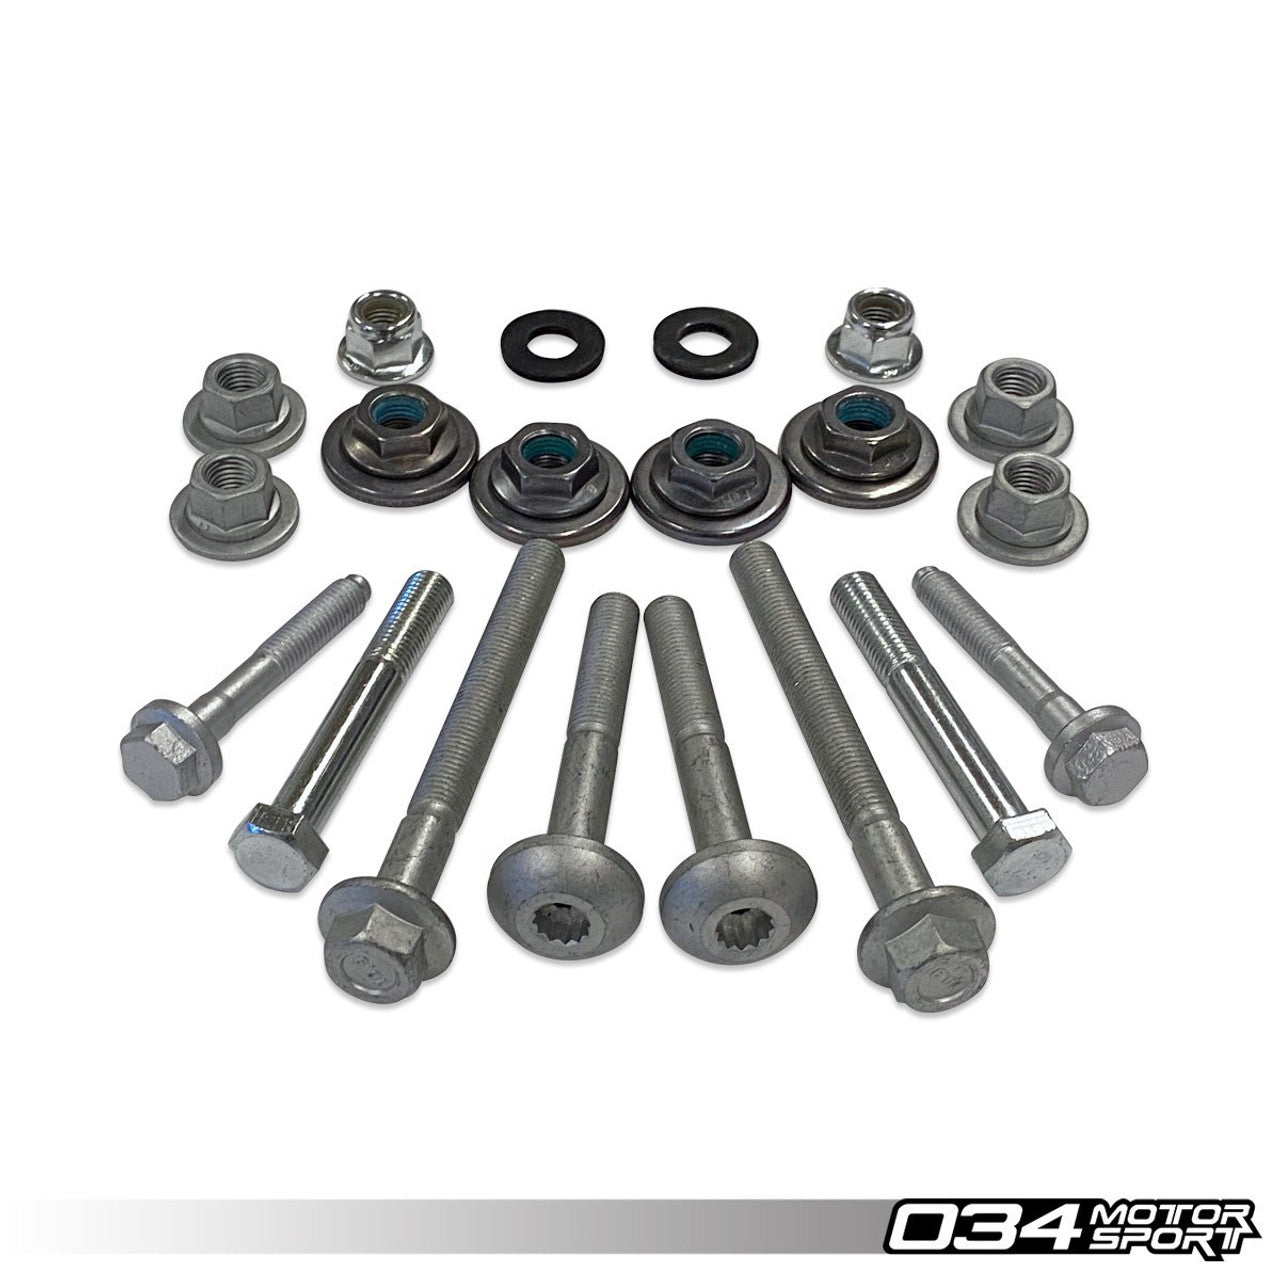 This hardware kit contains all hardware required to install a lower front control arm kit for early model B8/C7 vehicles with M12 hardware. All hardware is high-quality OEM plated.   